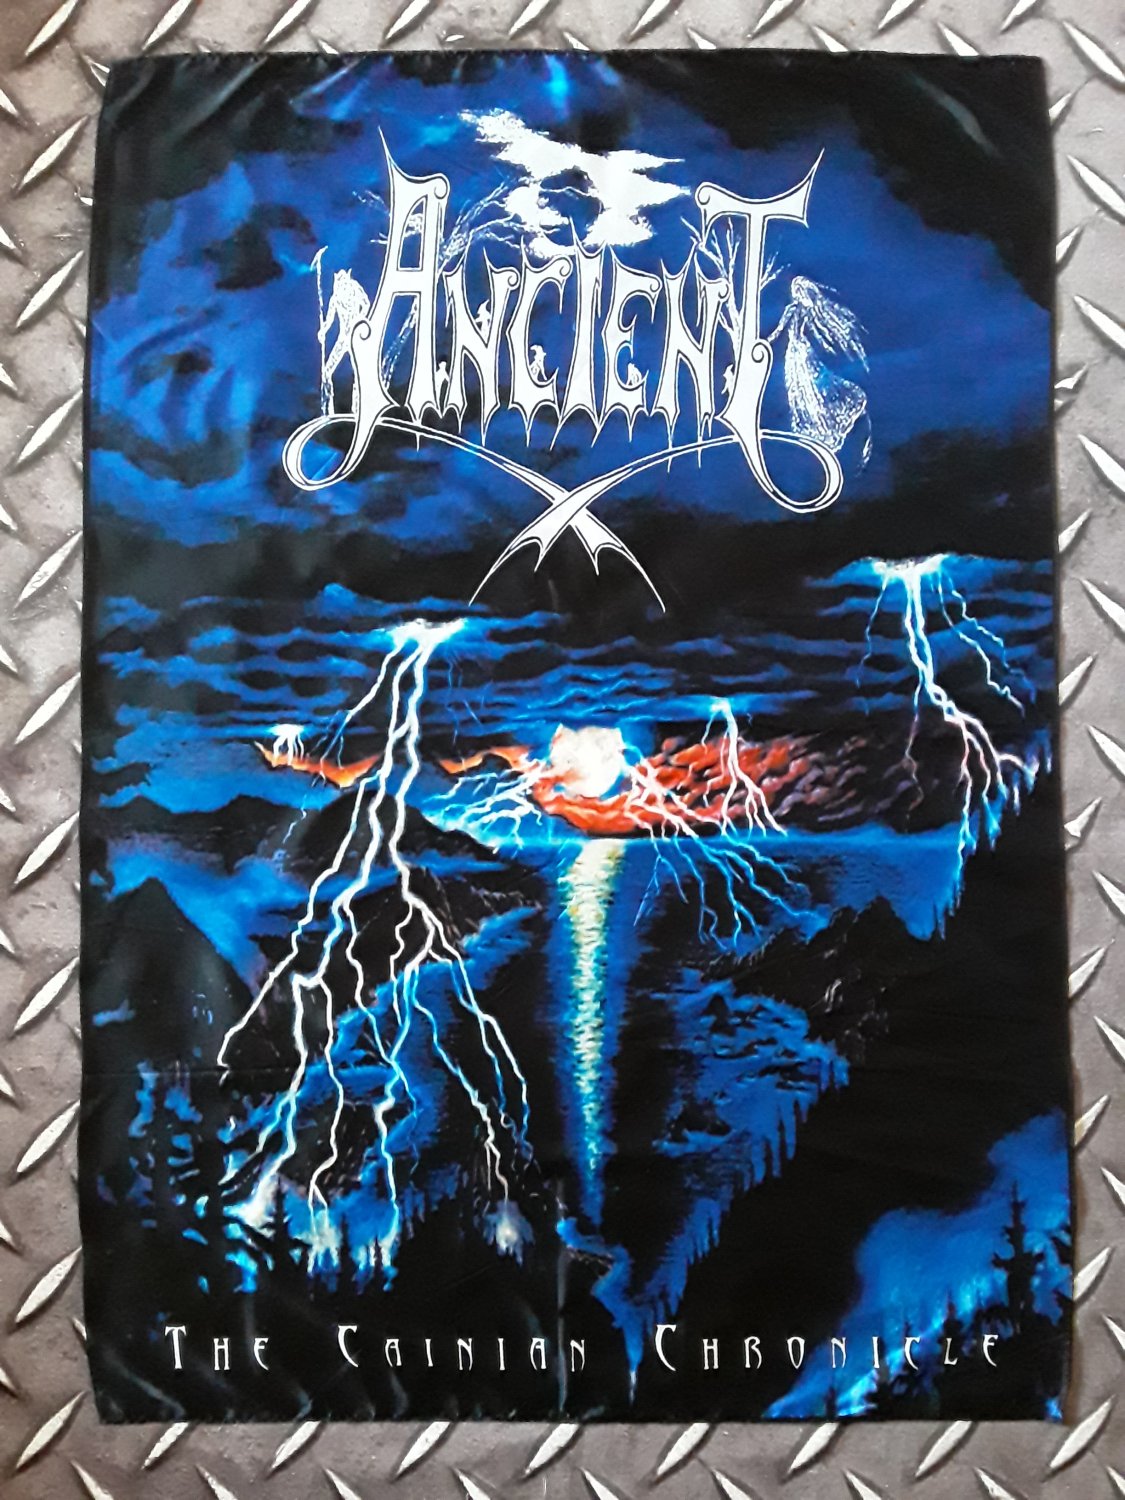 ANCIENT - The Cainian chronicle FLAG Heavy death black metal cloth poster